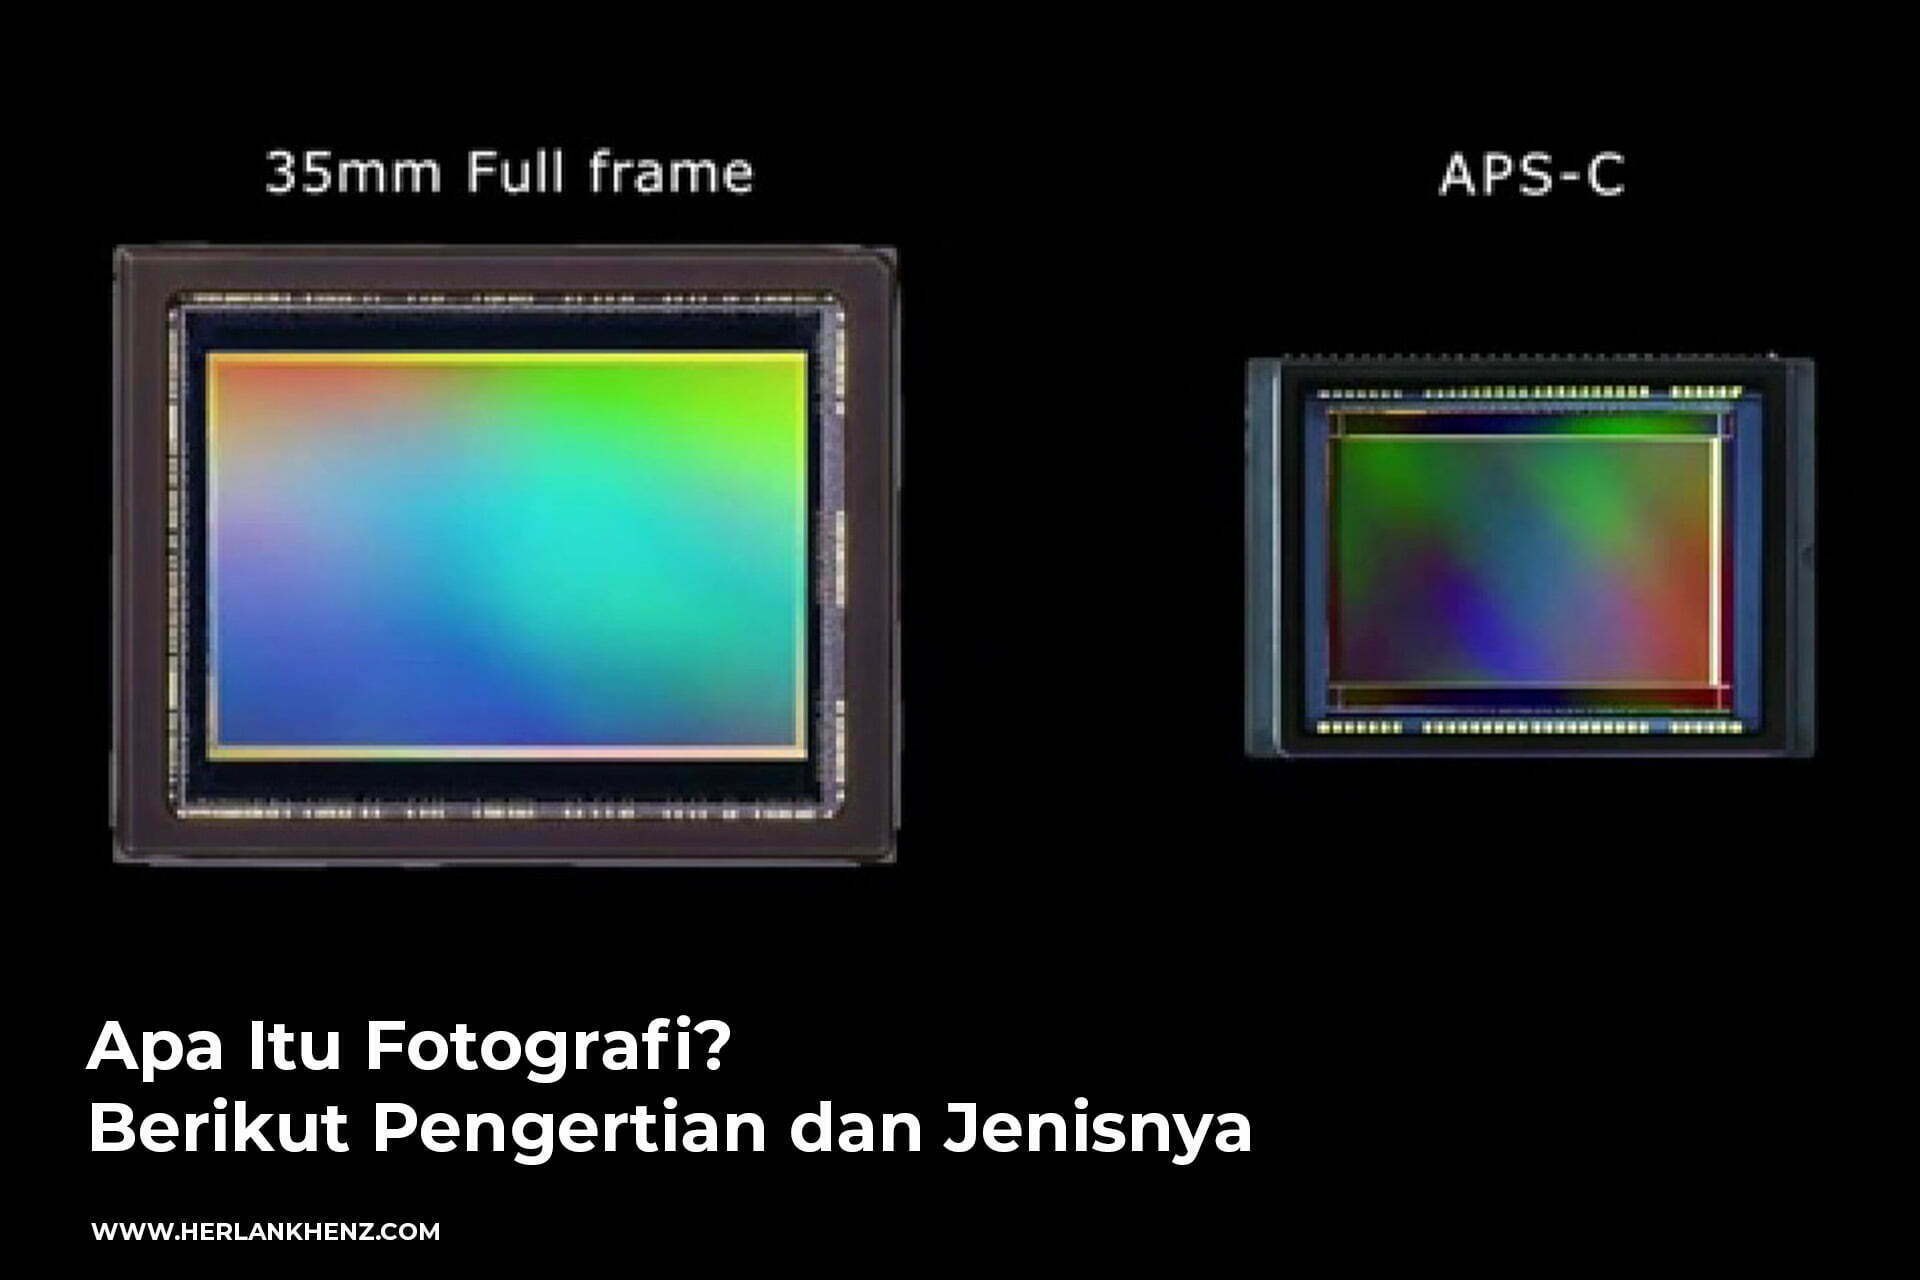 Difference between APSC and Full Frame in Cameras